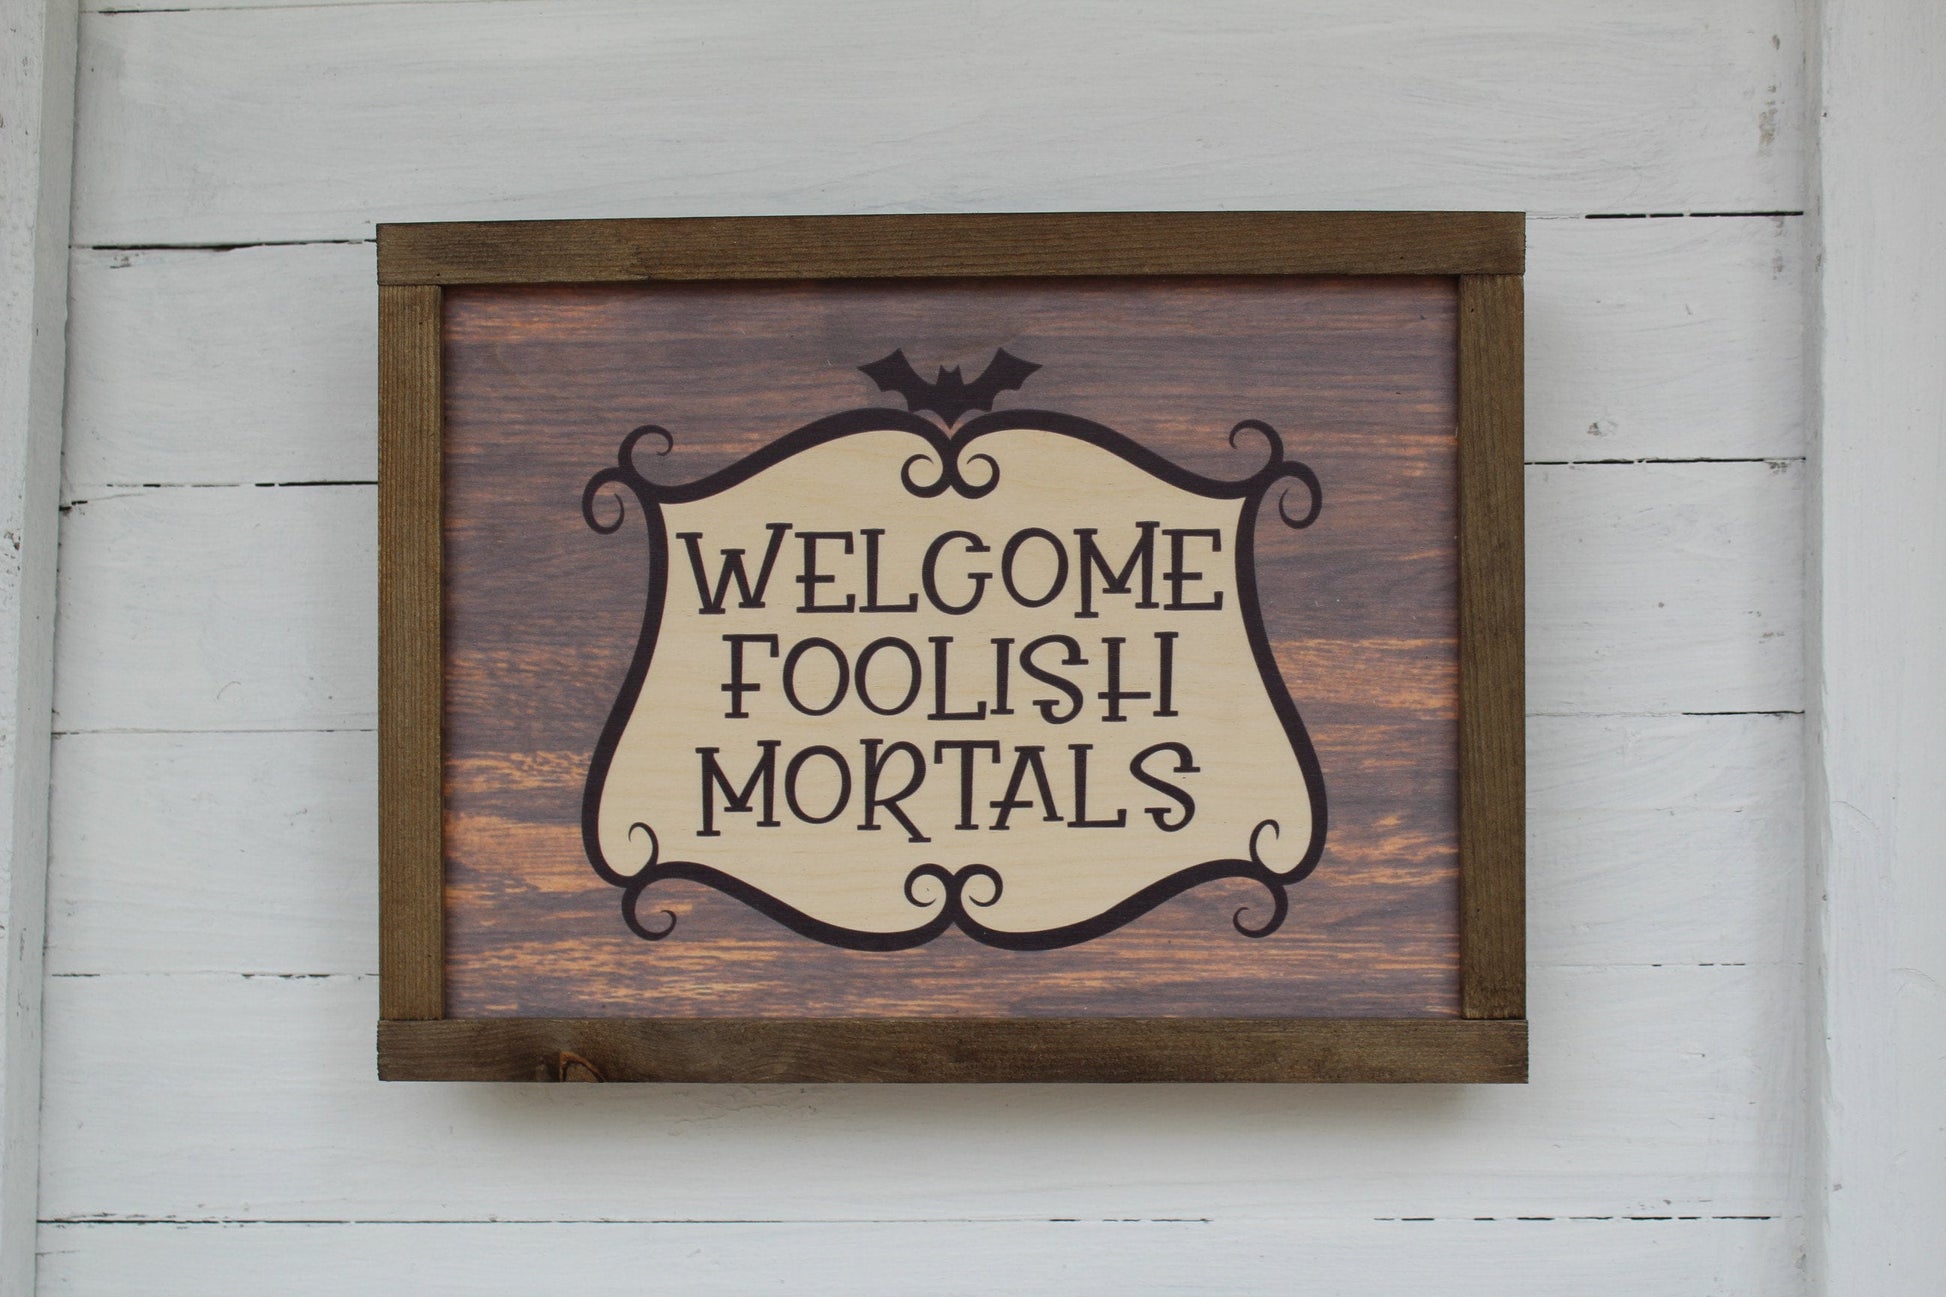 Welcome Foolish Mortals Halloween Witch Barn Wood Sign Rustic Wood Farmhouse Primitive Wall Bat Haunted House Ghost